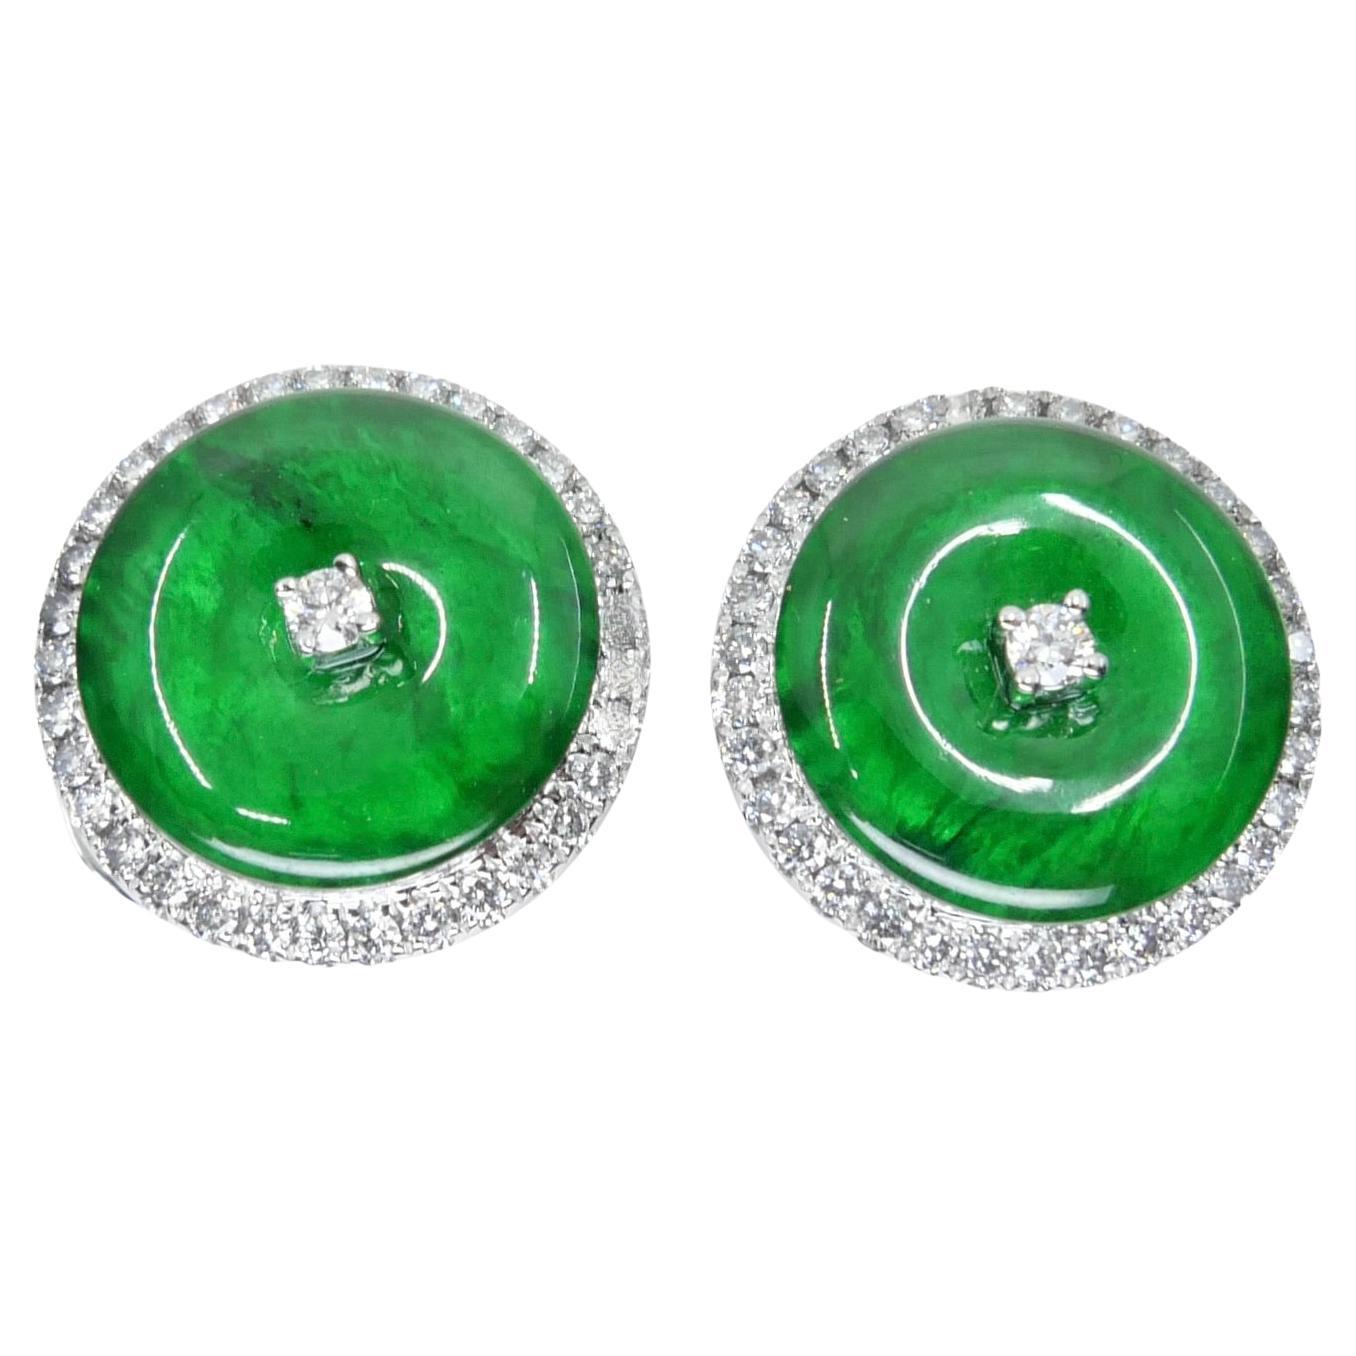 Certified Natural Type A Jadeite Jade And Diamond Earrings. Apple Green Color